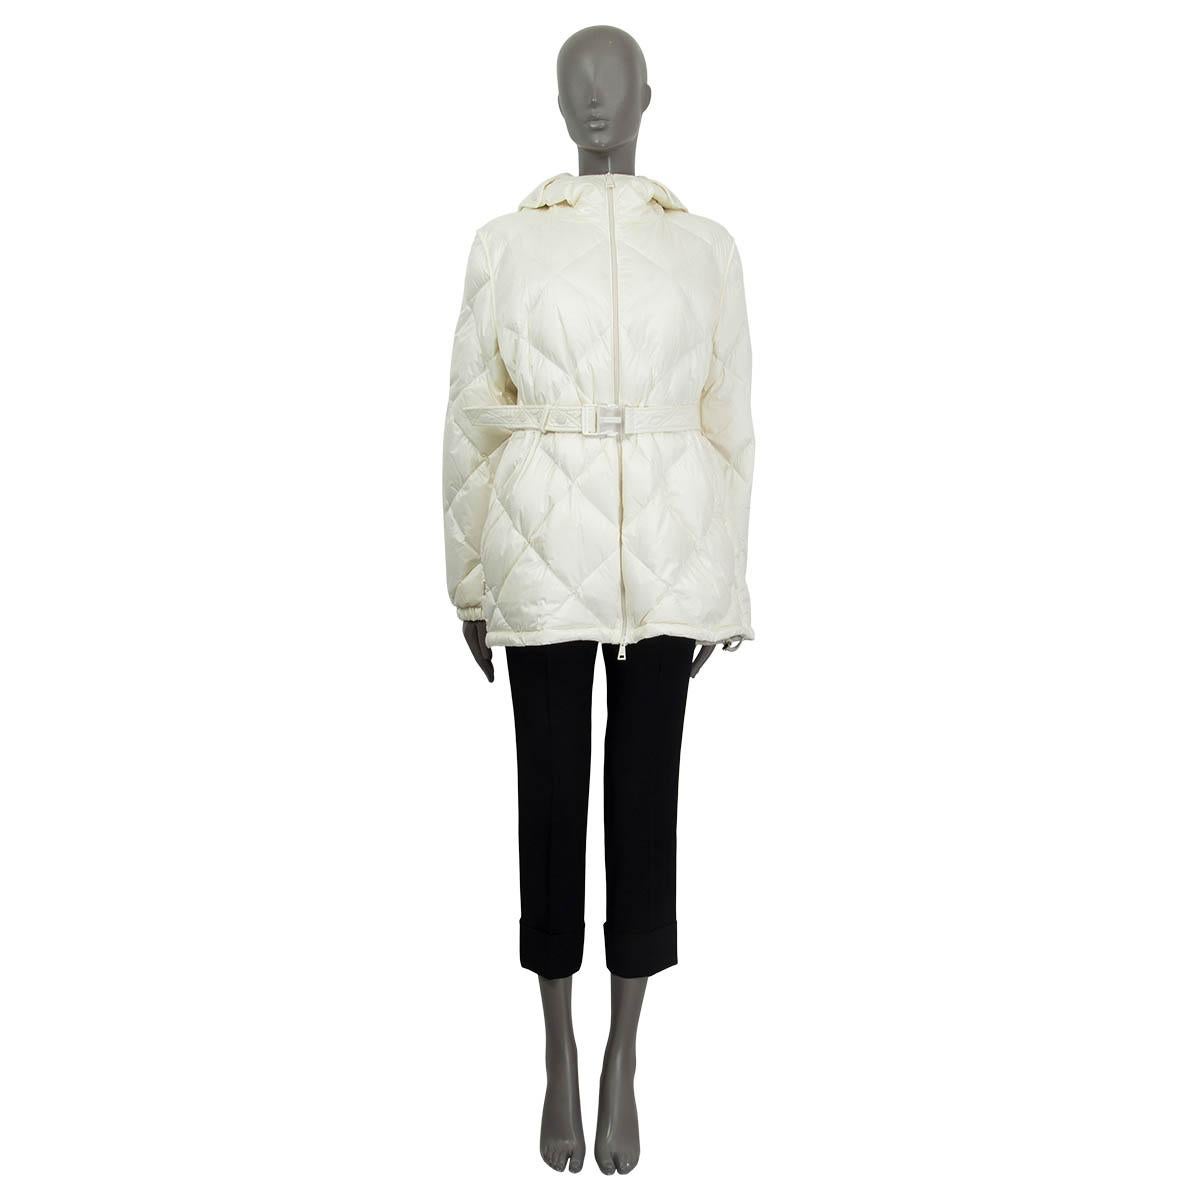 100% authentic Moncler 'Sargas Giubbotto' quilted down jacket in off-white polyamide (100%). Features two zipped pockets on the front and a hood. Opens with a two-way zipper on the front. Lined in off-white polyamide (100%) and filled with downs